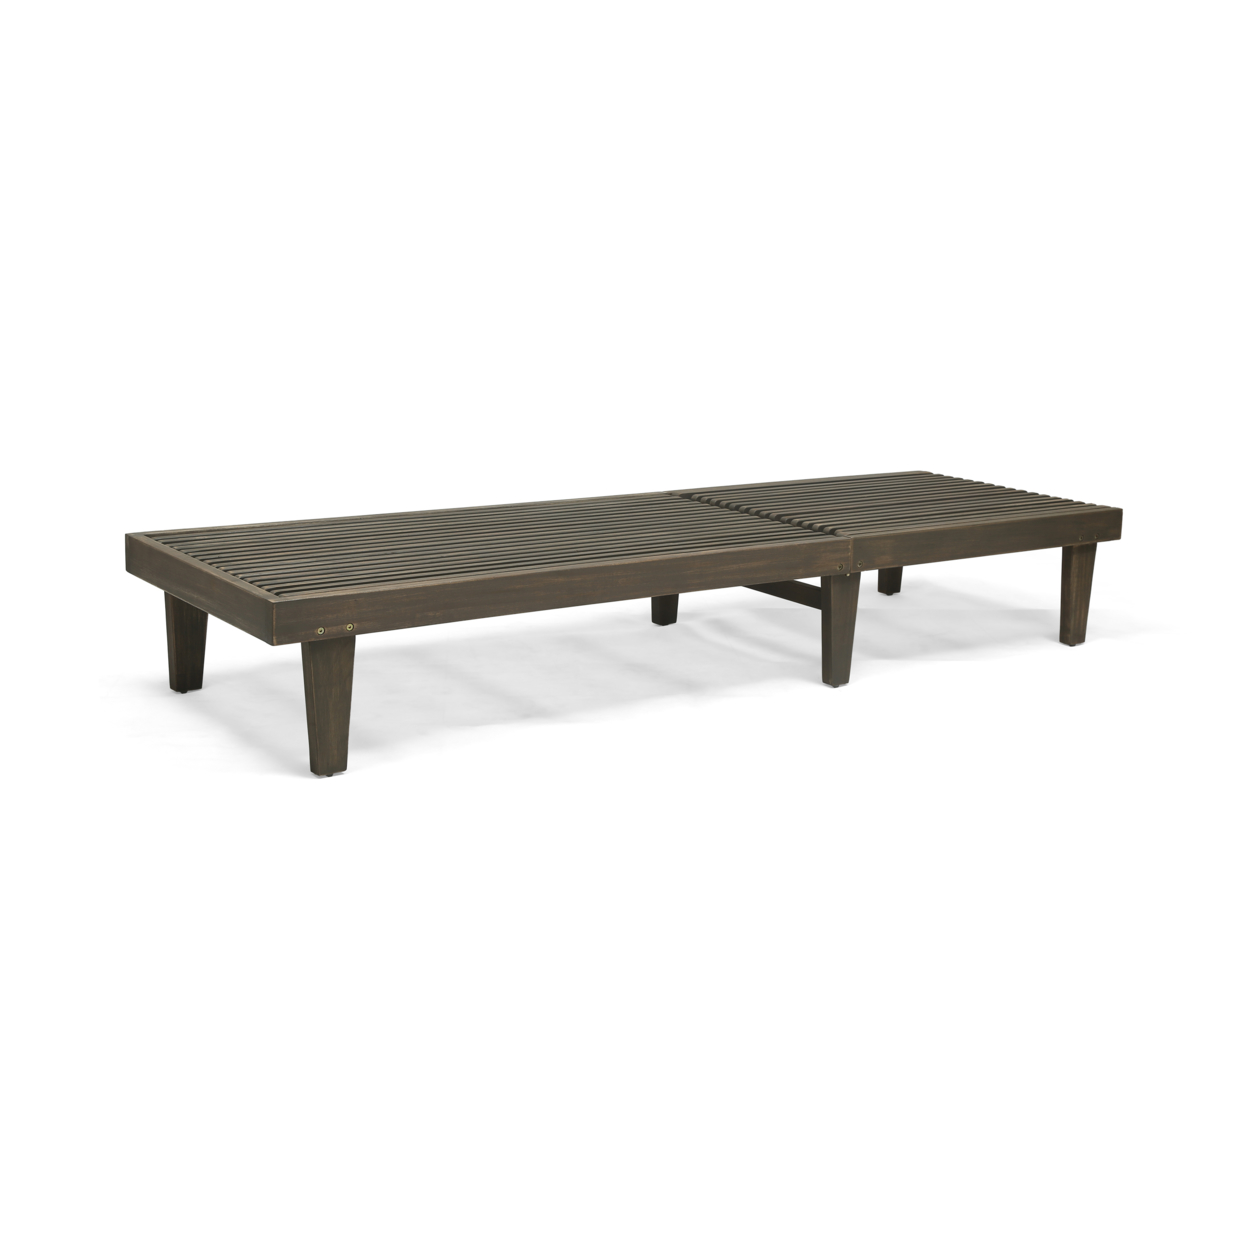 Addisyn Outdoor Wooden Chaise Lounge - Gray Finish